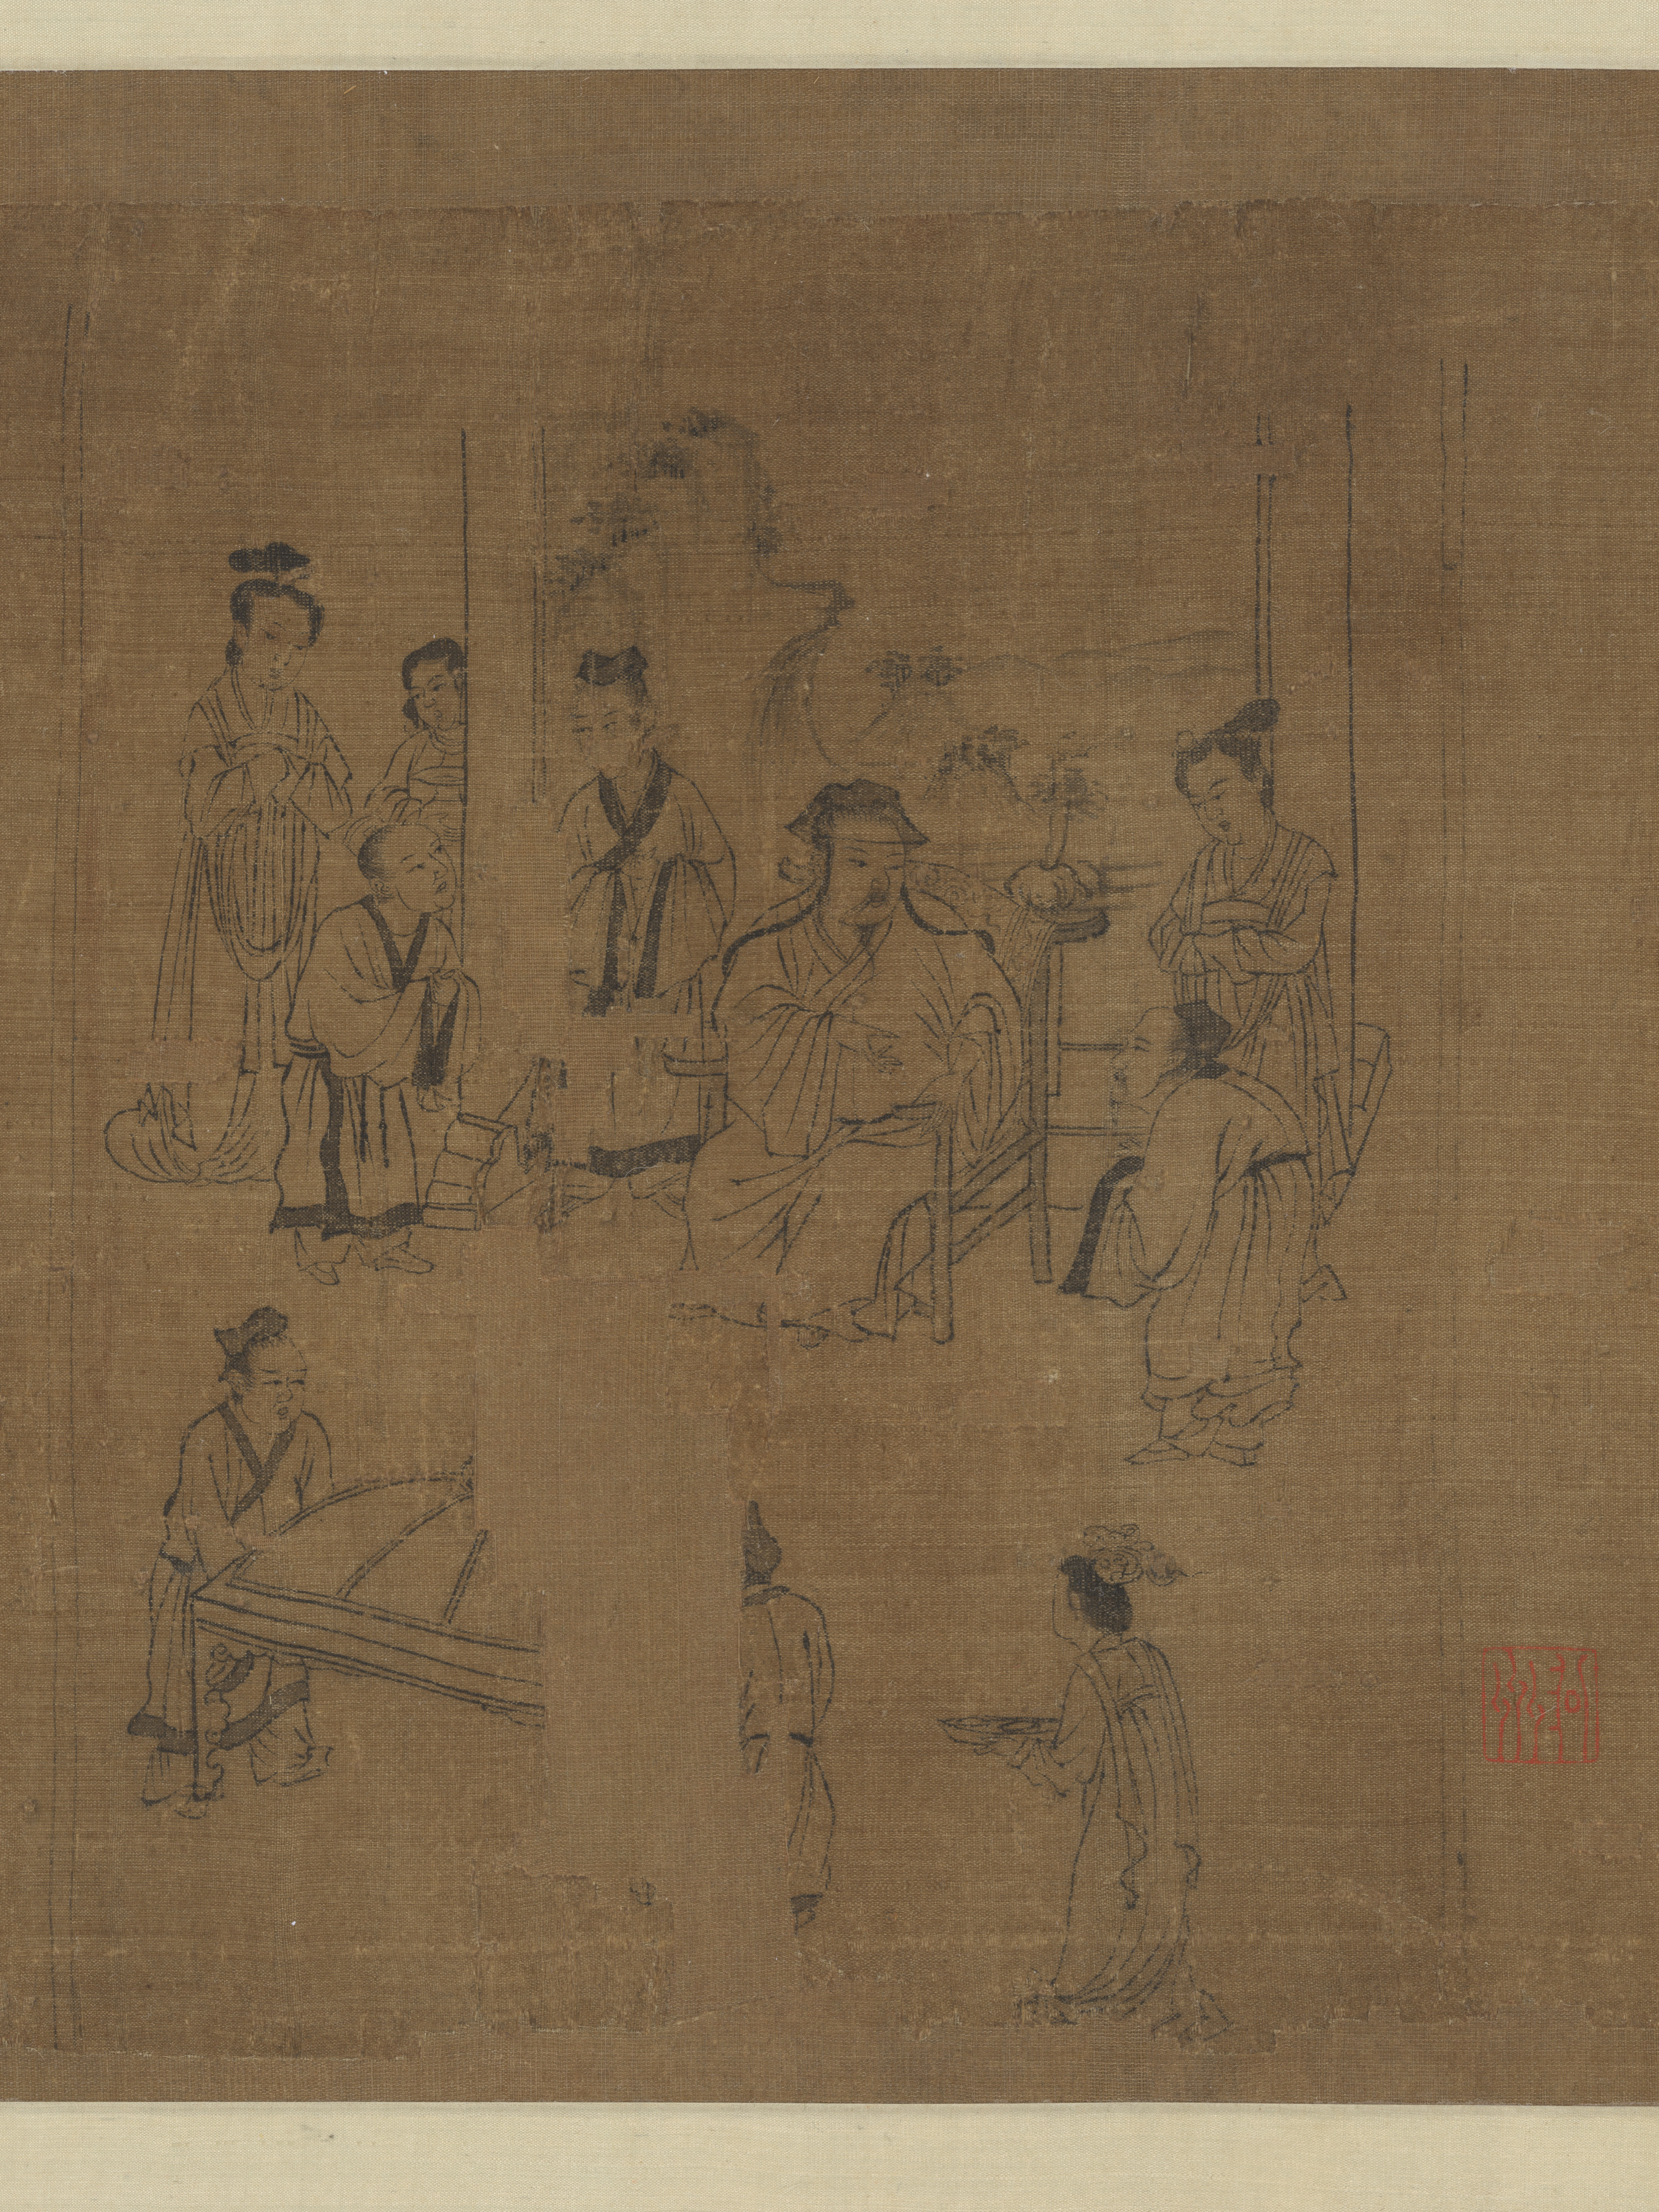 Li Gonglin | The Classic of Filial Piety | China | Northern Song